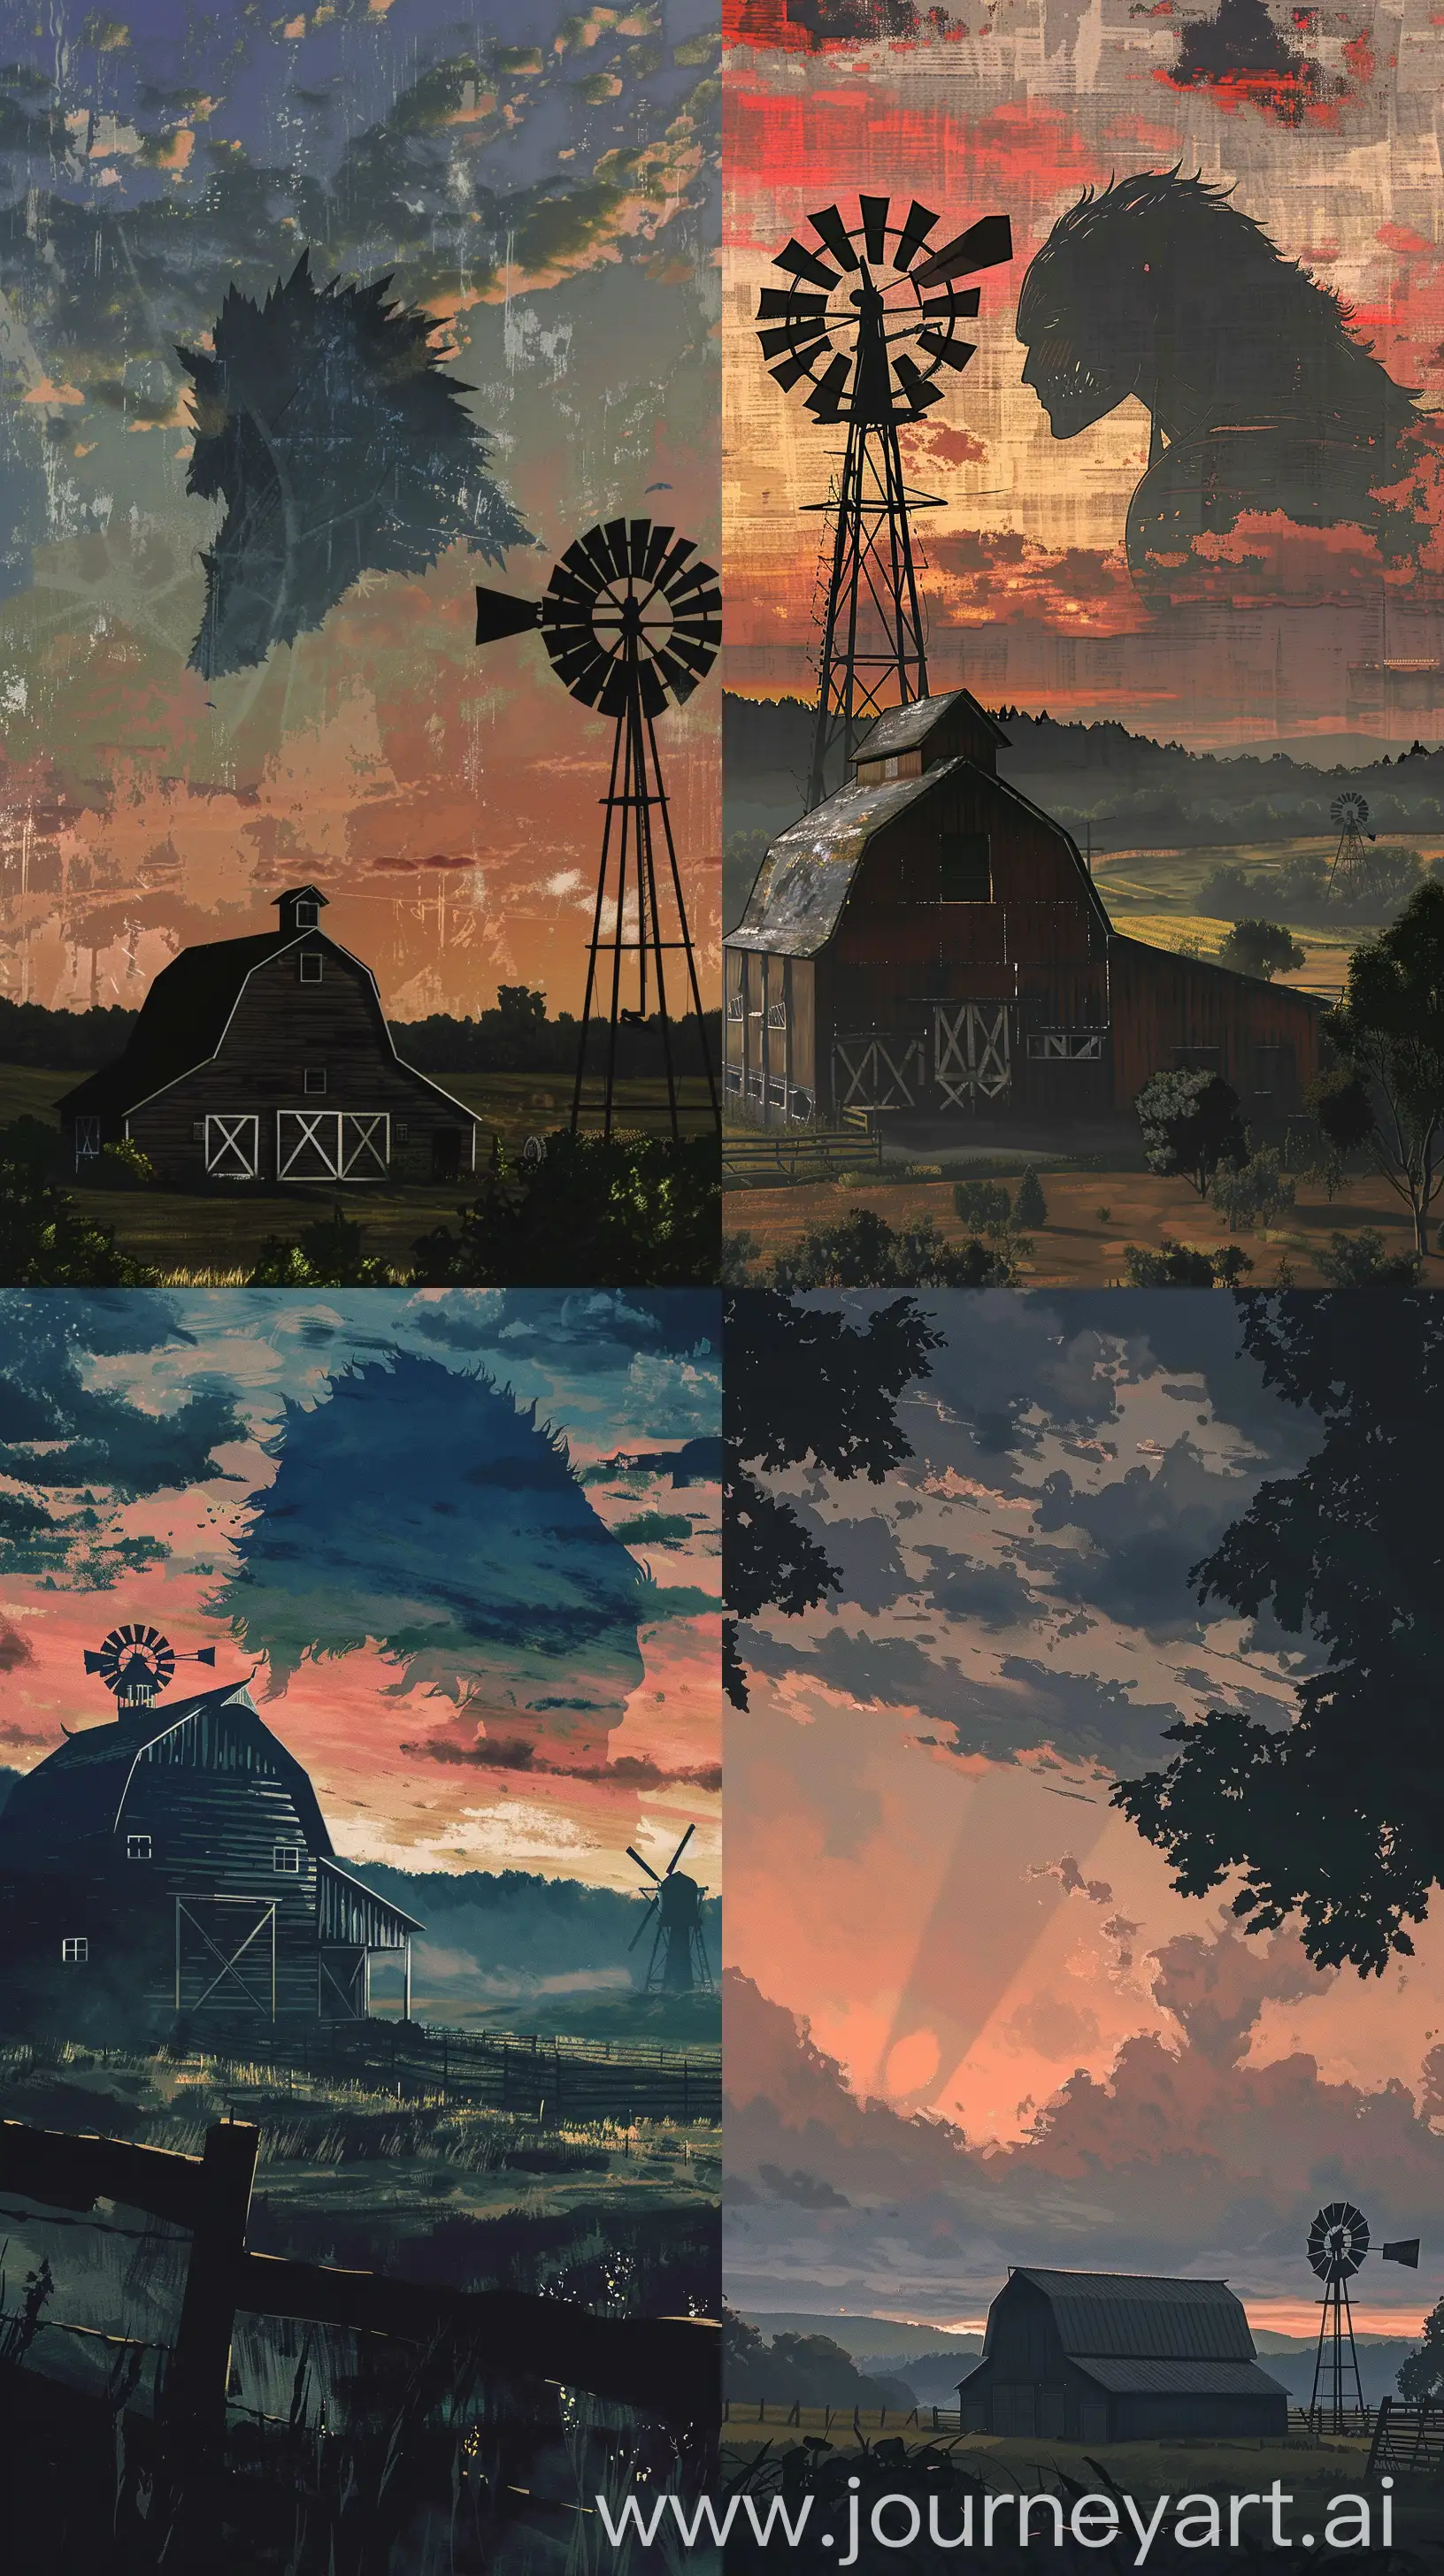 Envision a phone wallpaper that portrays the quiet beauty of a rural landscape in Winslow Homer's style, with a focus on the simplicity of farm life. A scene where a barn and windmill silhouette against a twilight sky, while the shadow of a Titan looms in the distance, subtly integrating "Attack on Titan" elements into Homer's idyllic American countryside setting.` --ar 9:16